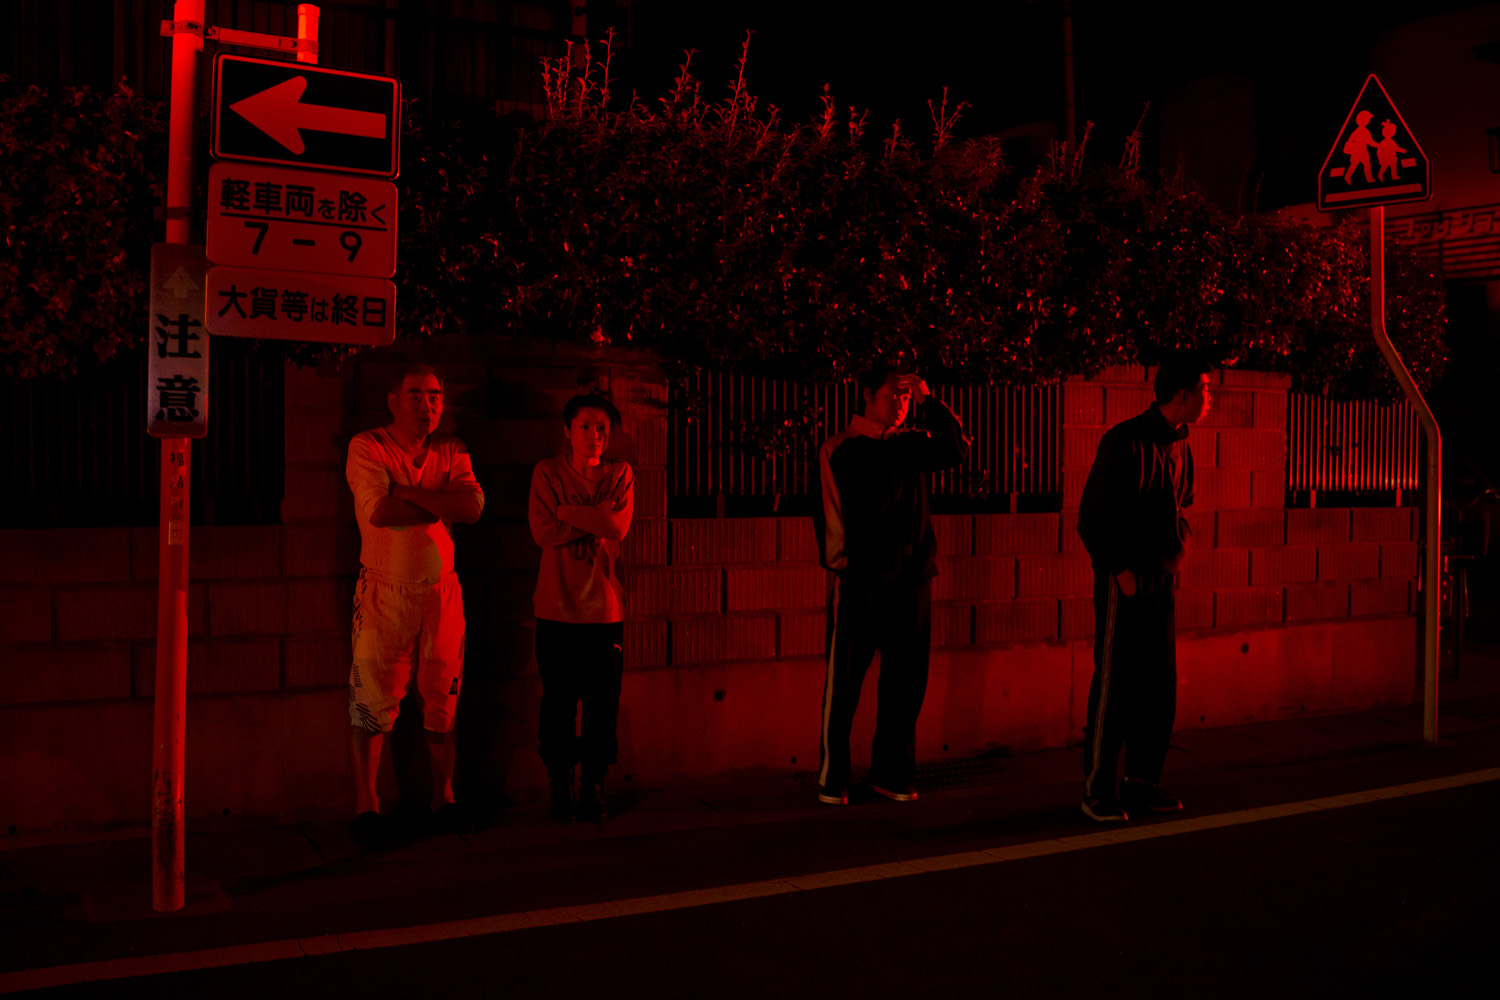 Japan, Fukushima City, 2014Residents stand on the street while rescue teams try and get into a one bedroom apartment after a part time decontamination worker locked himself into his apartment and committed suicide by breathing in burning charcoal on the 1st of April shortly after 9pm.